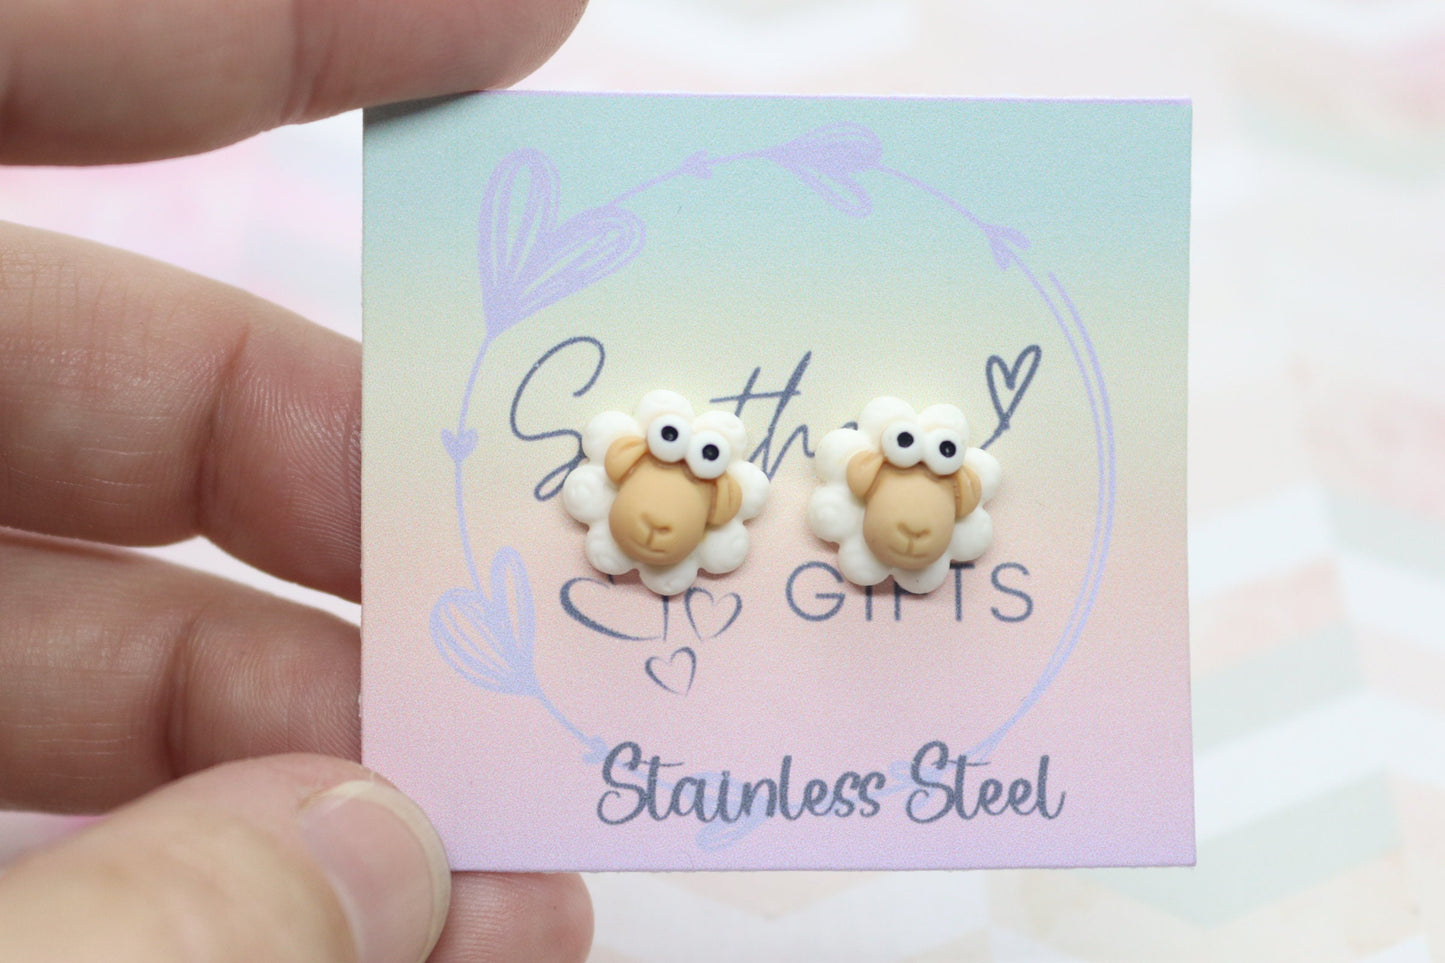 Small 3D Sheep Statement Stud Earrings